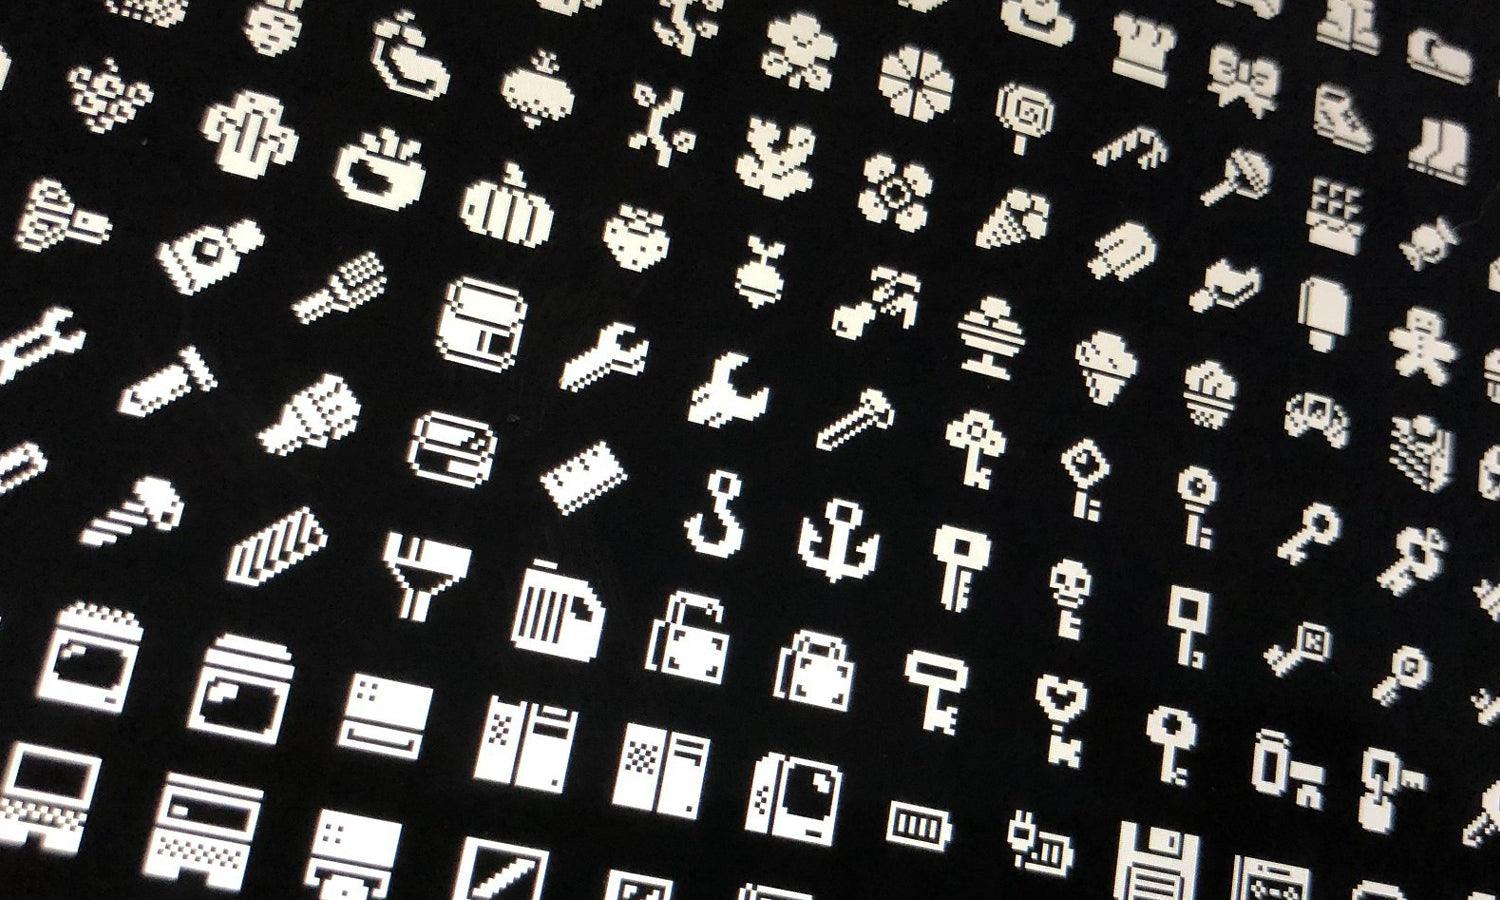 12 Proper Ways to Use Icon Design in Your Works - Kreafolk